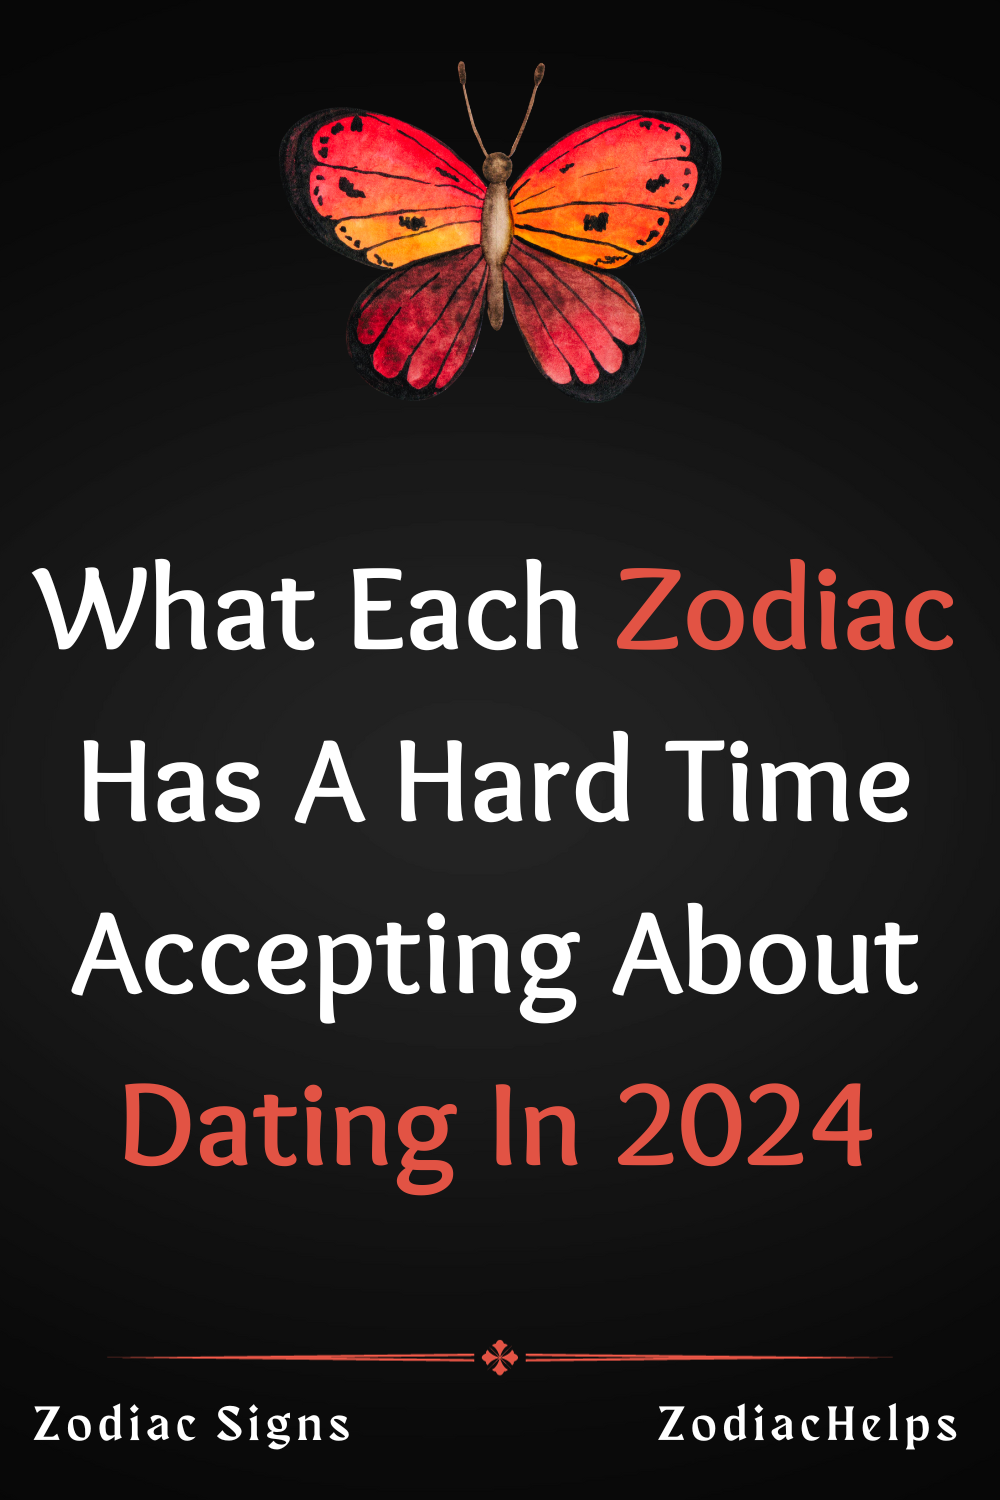 What Each Zodiac Has A Hard Time Accepting About Dating In 2024